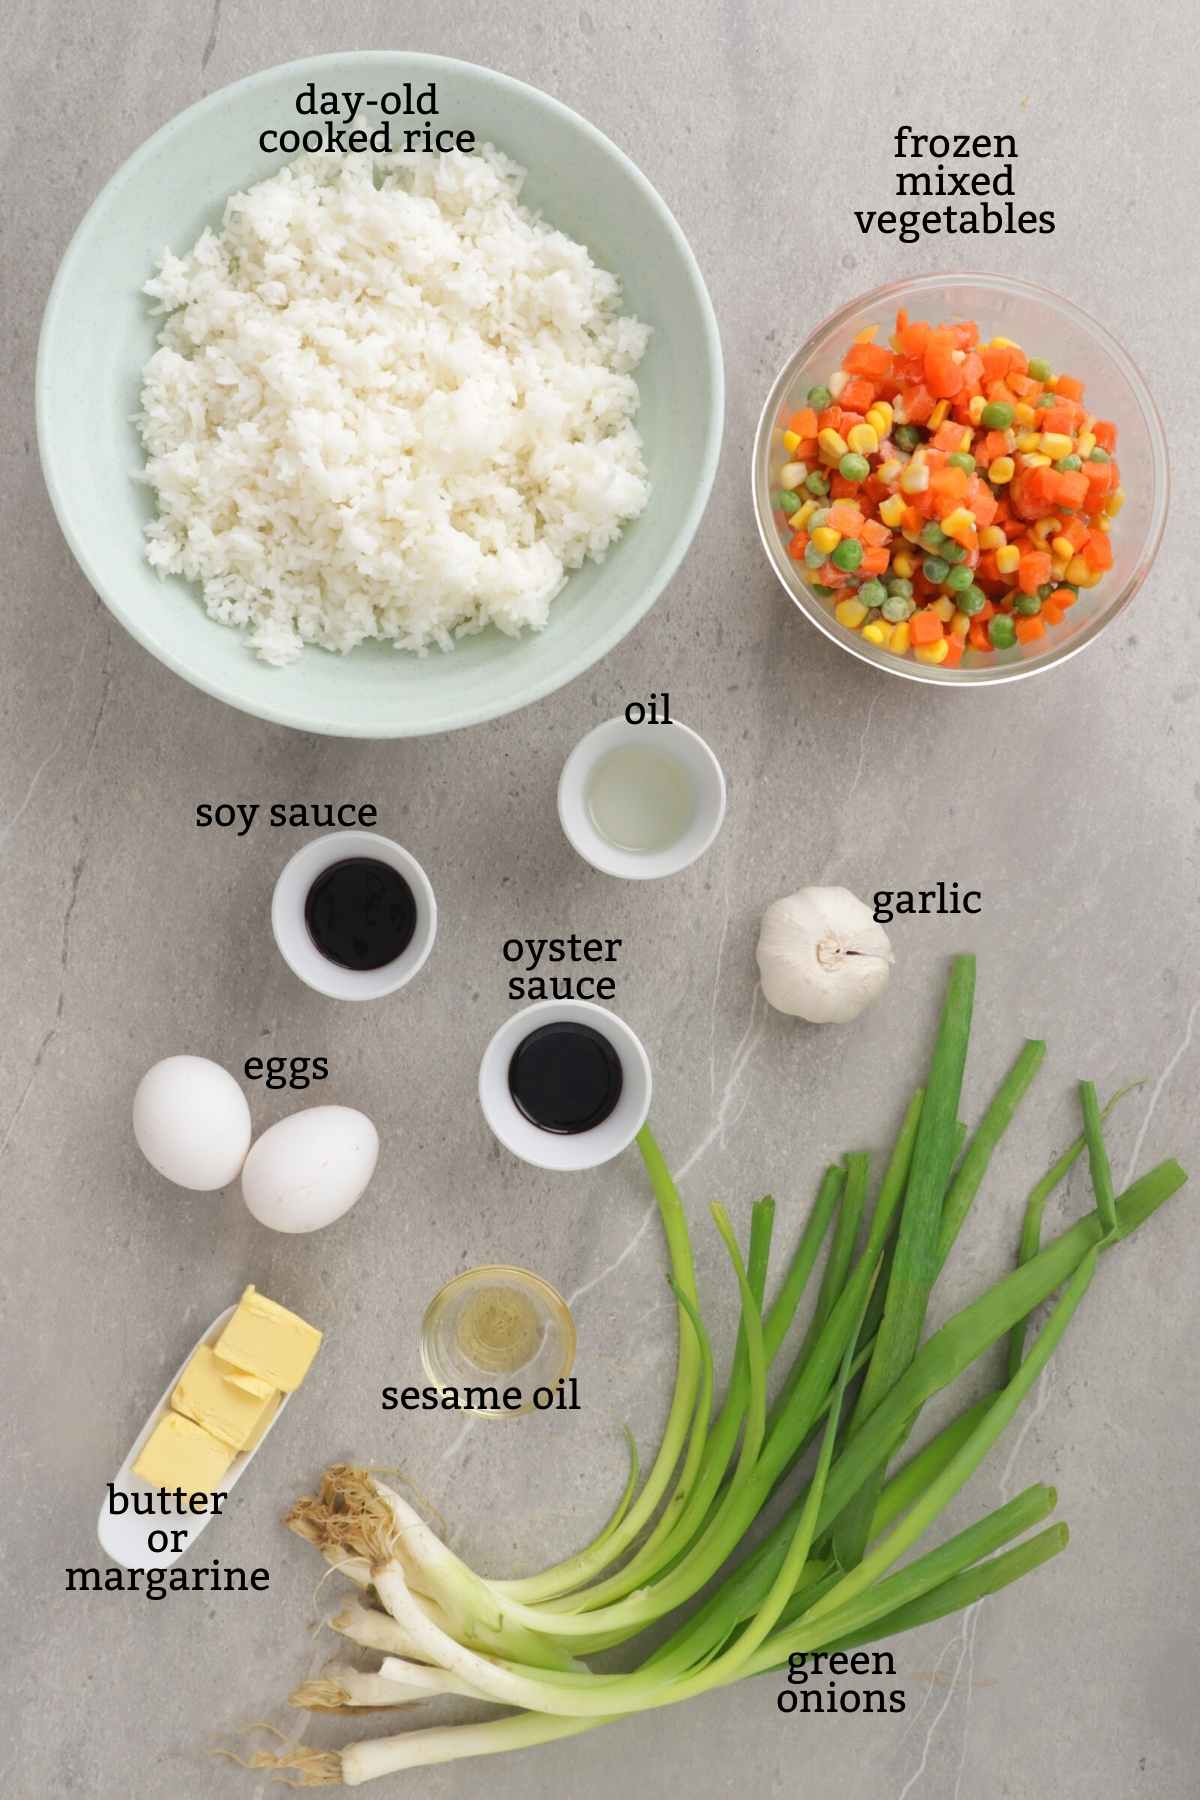 Ingredients for Chinese fried rice.